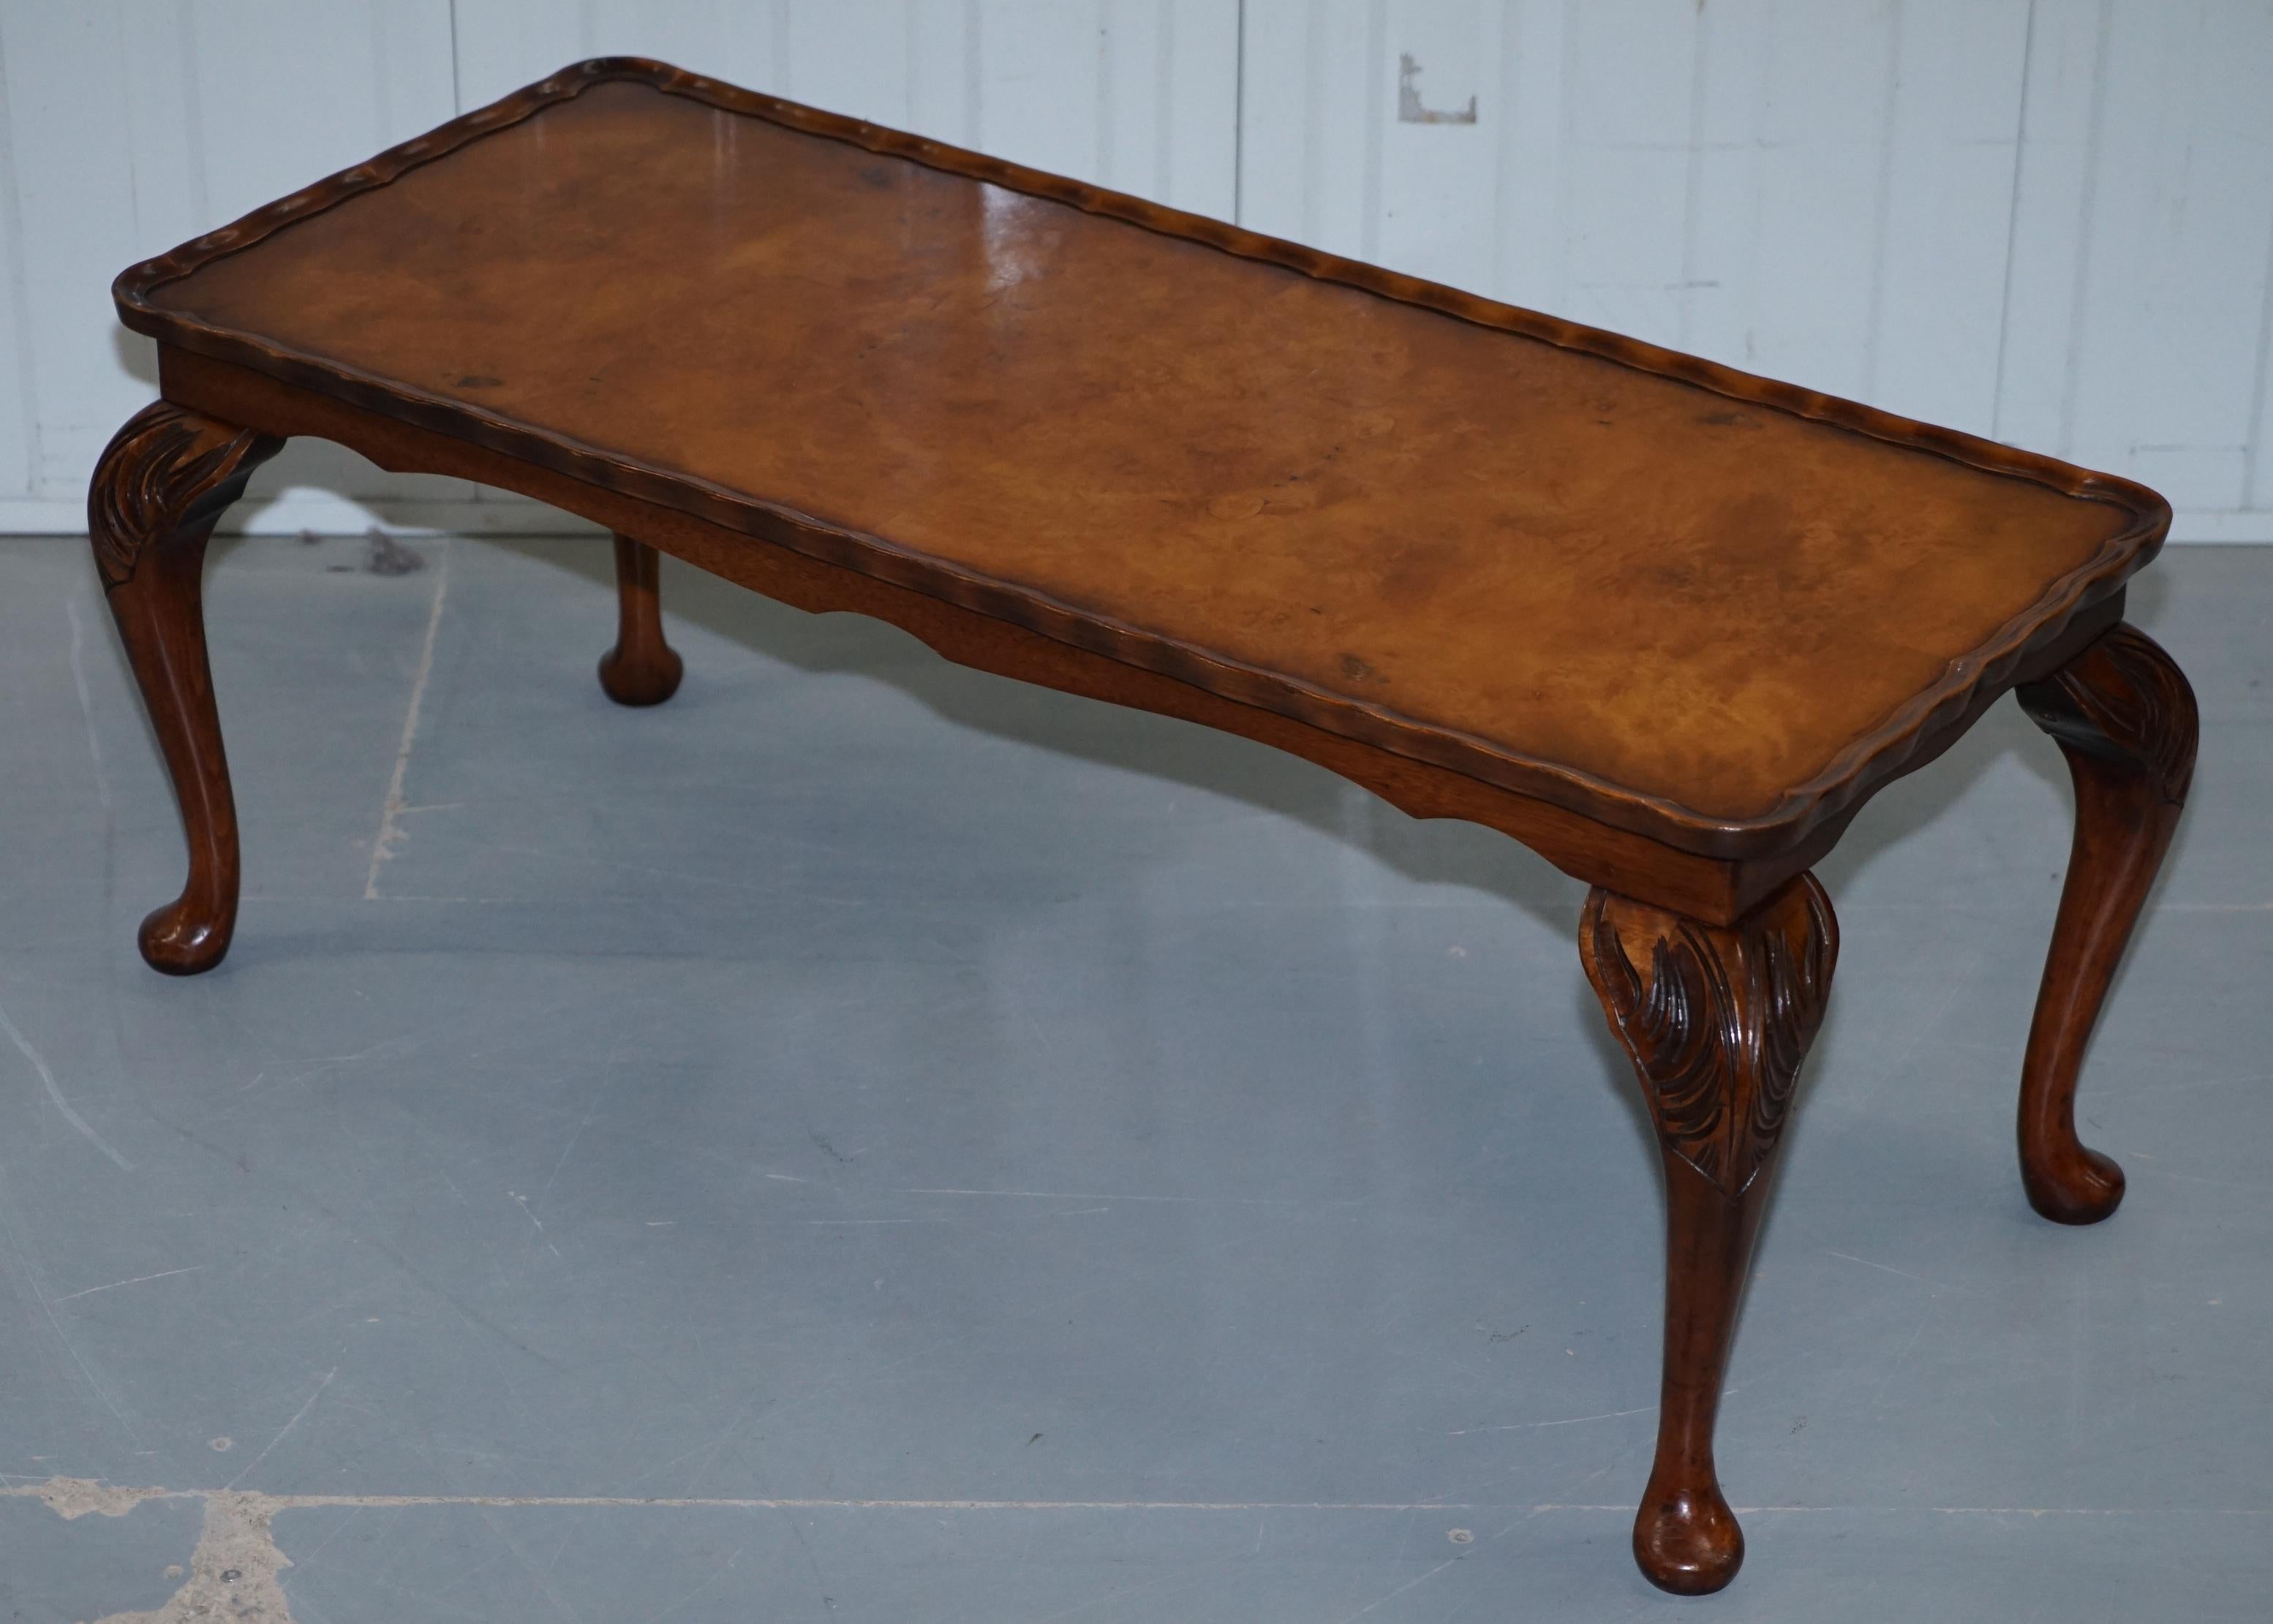 We are delighted to offer for sale this stunning Bevan Funnell vintage Burr Walnut coffee table with Elegant cabriolet legs 

A very decorative piece with a timber patina to die for, the Walnut is expertly cut and looks glorious. The table has lots